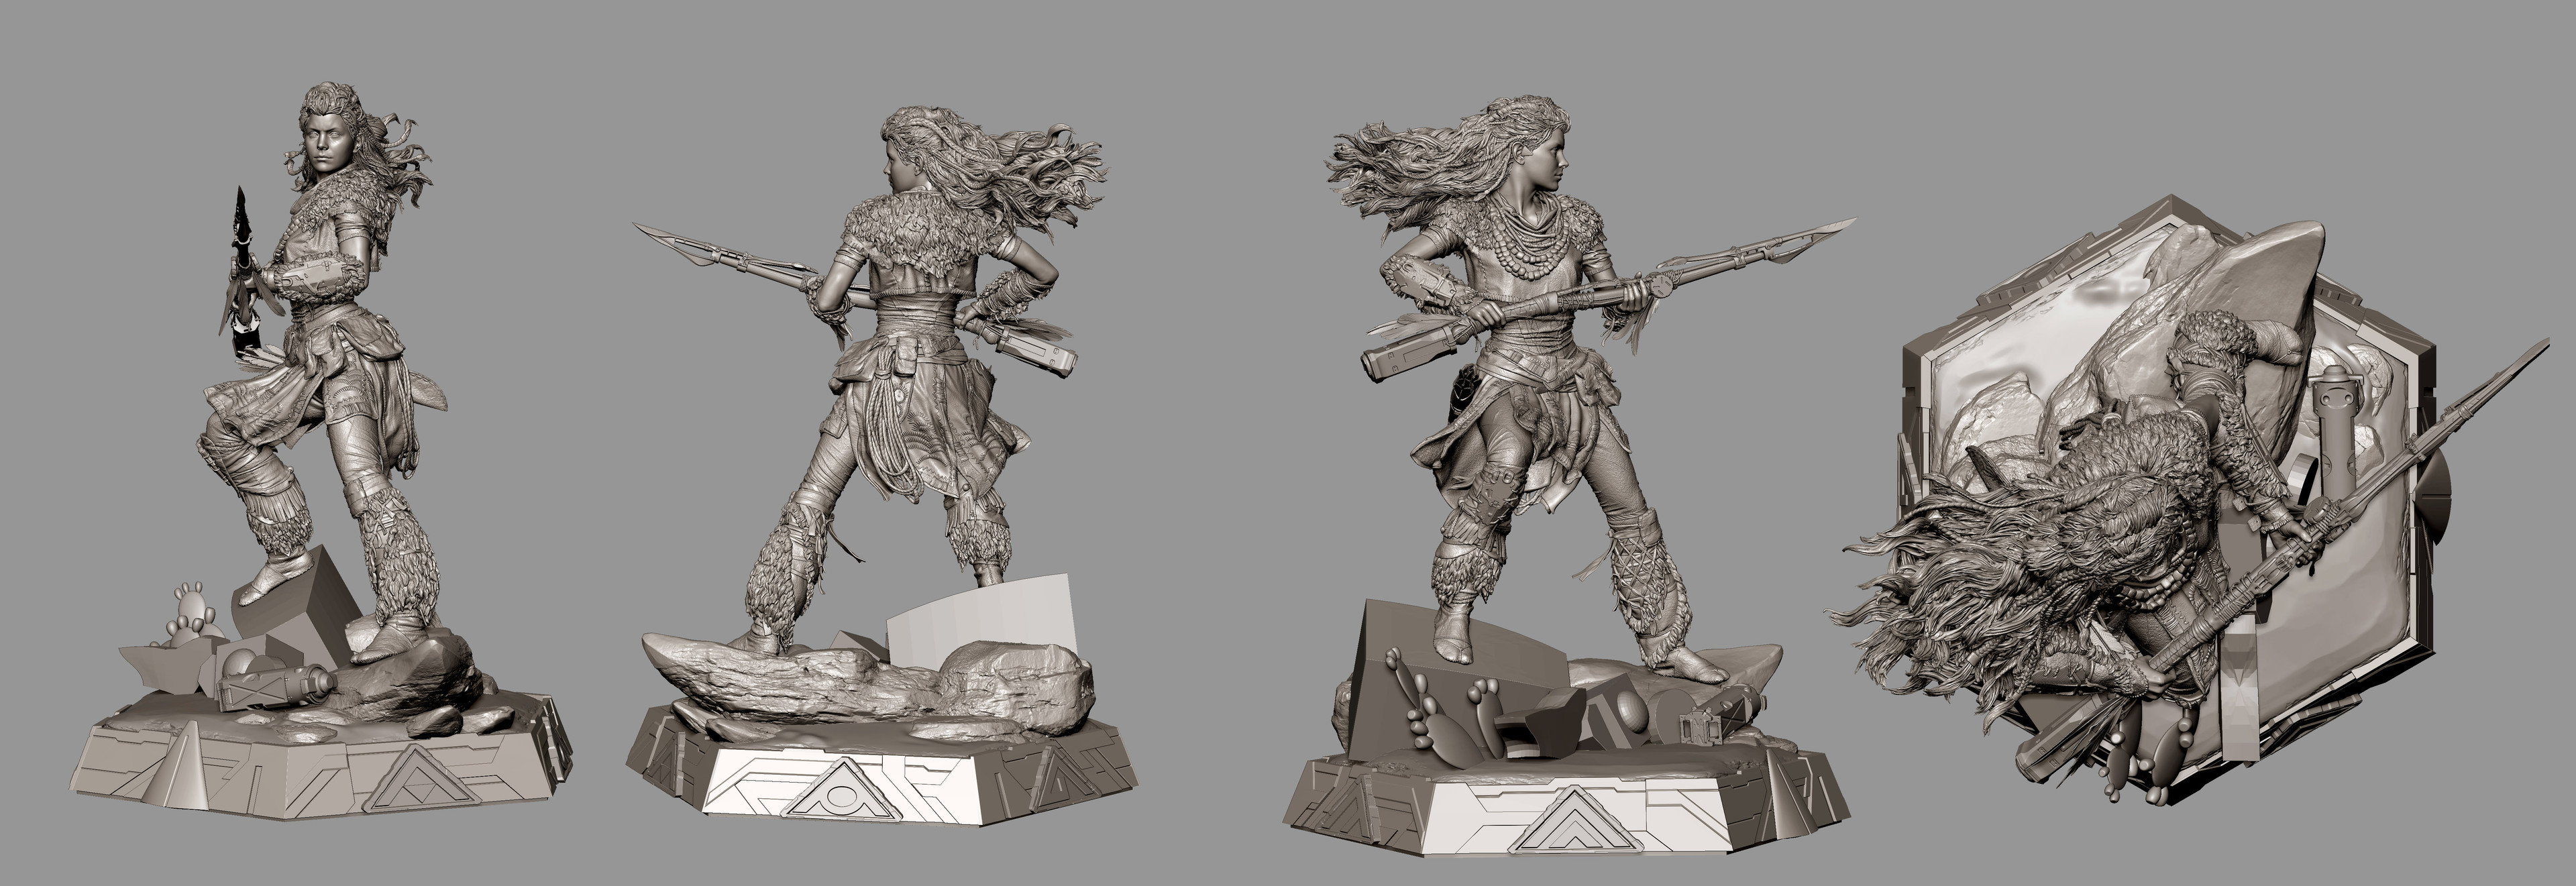 HORIZON ZERO DAWN, OUR 1000TH PROJECT, RELEASED WITH 3D ART FROM